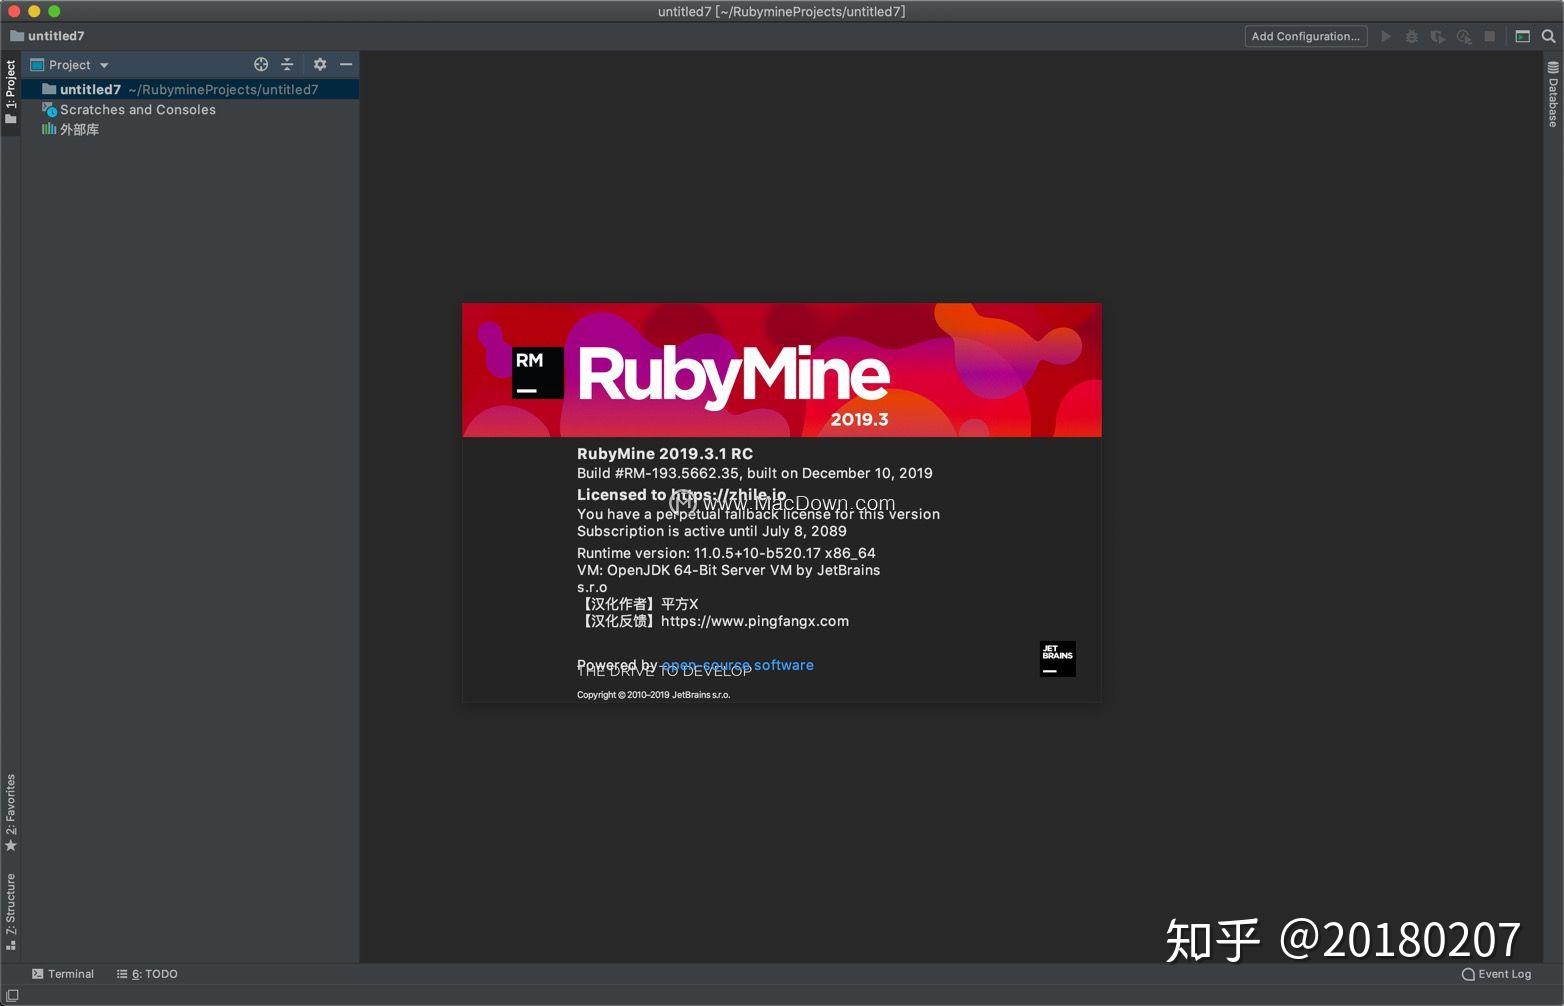 download the new JetBrains RubyMine 2023.1.3